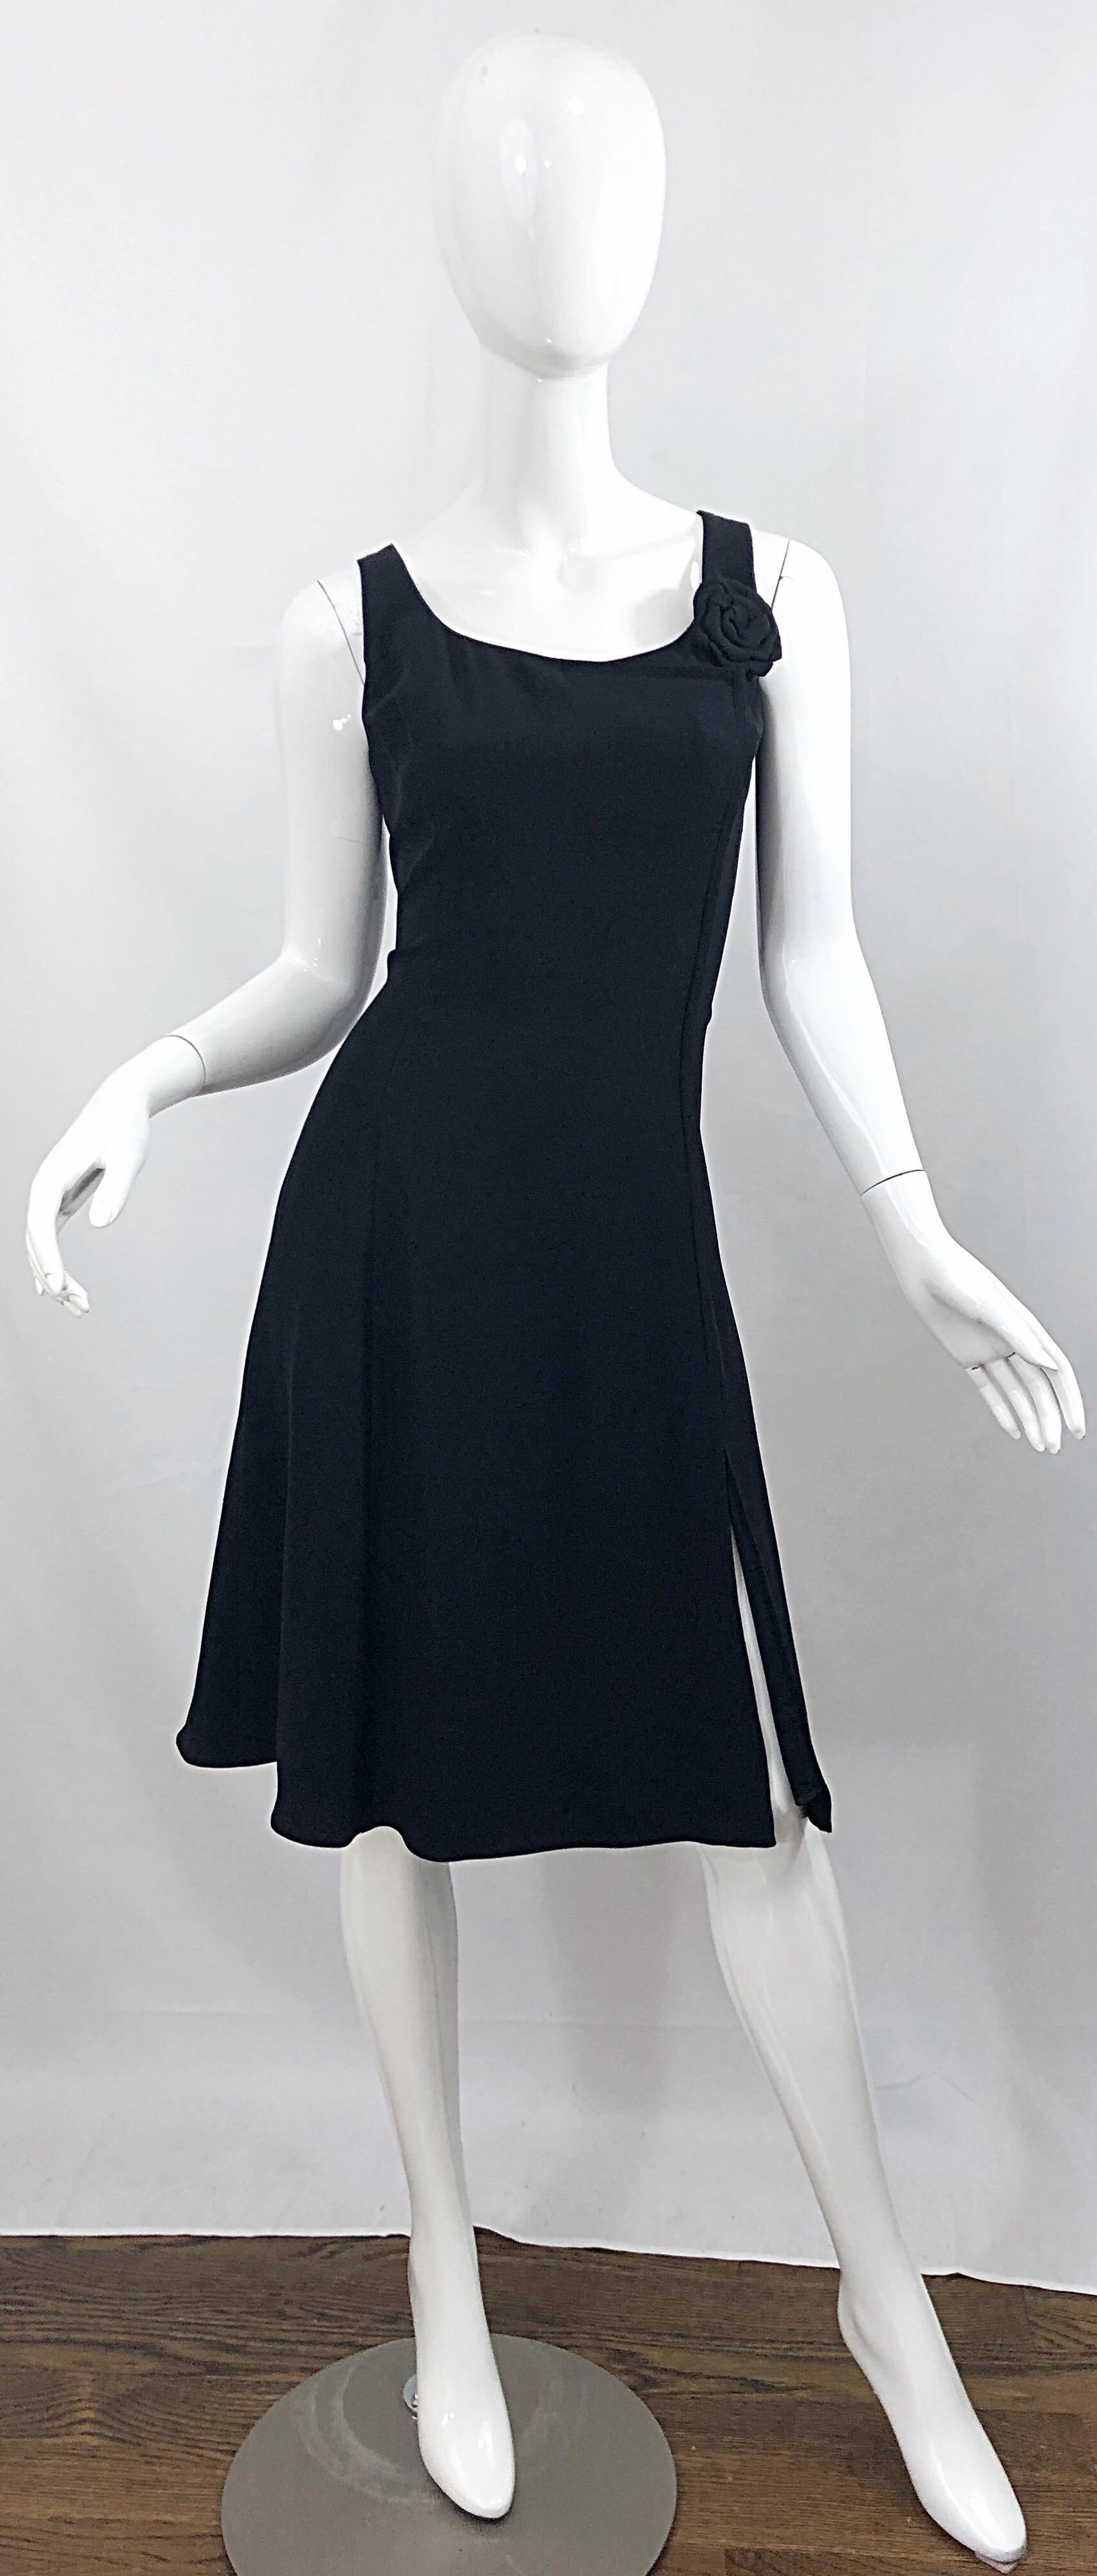 The ultimate chic vintage GIORGIO ARMANI Size 12 / 44 flirty little black dress! Features a tailored bodice with a forgiving skirt. Slit up the left hem reveals just the right amount of leg. Rosette at left shoulder adds just the right amount of